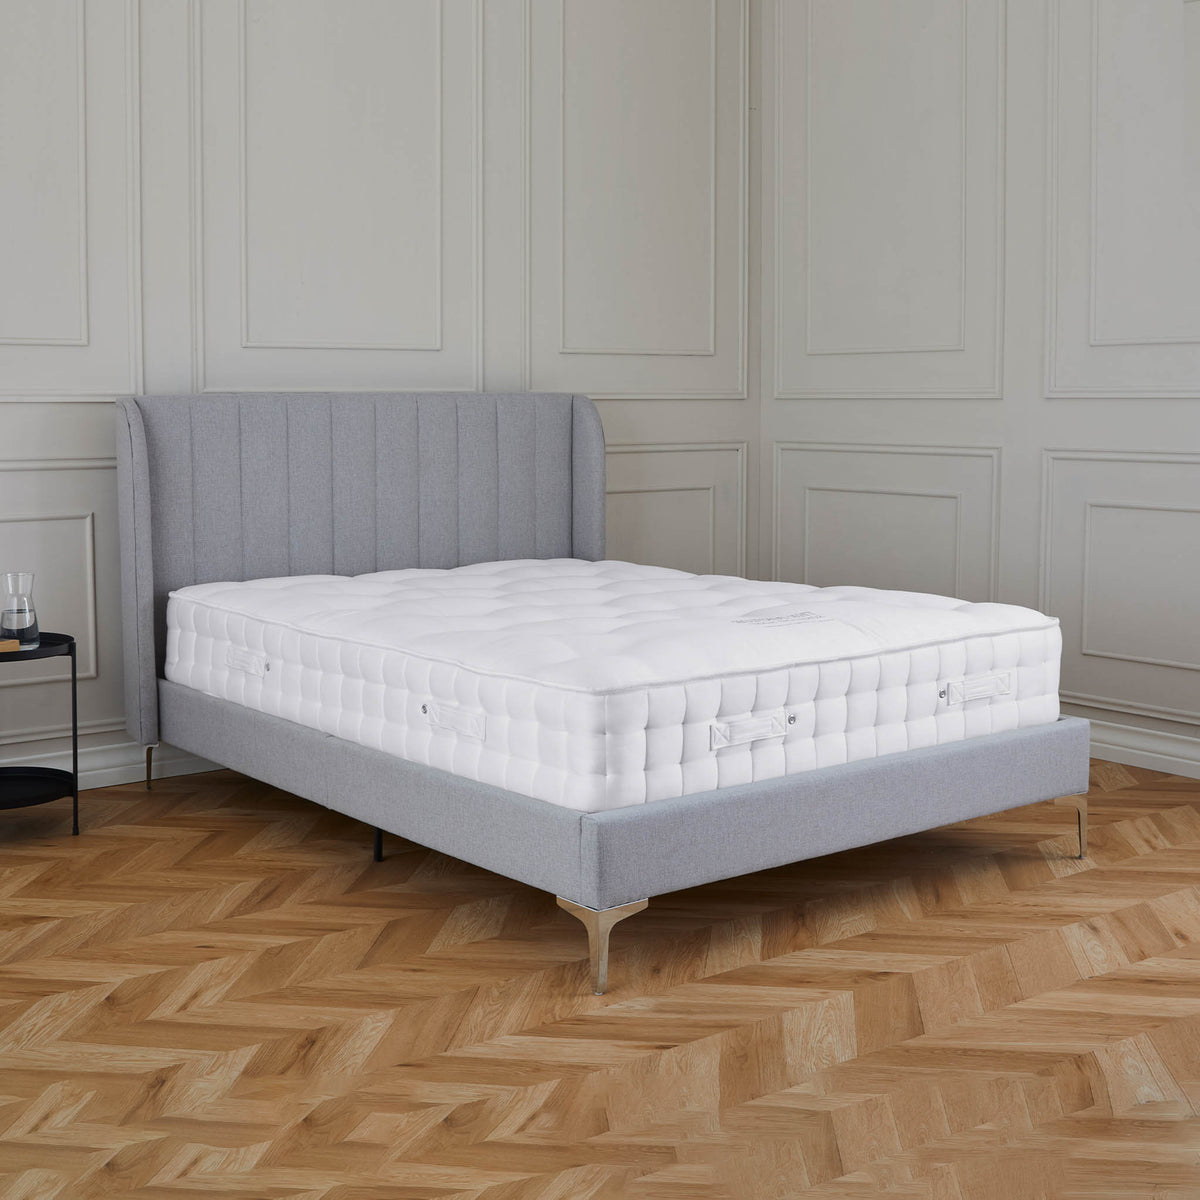 Ramona grey faux wool upholstered bed frame lifestyle